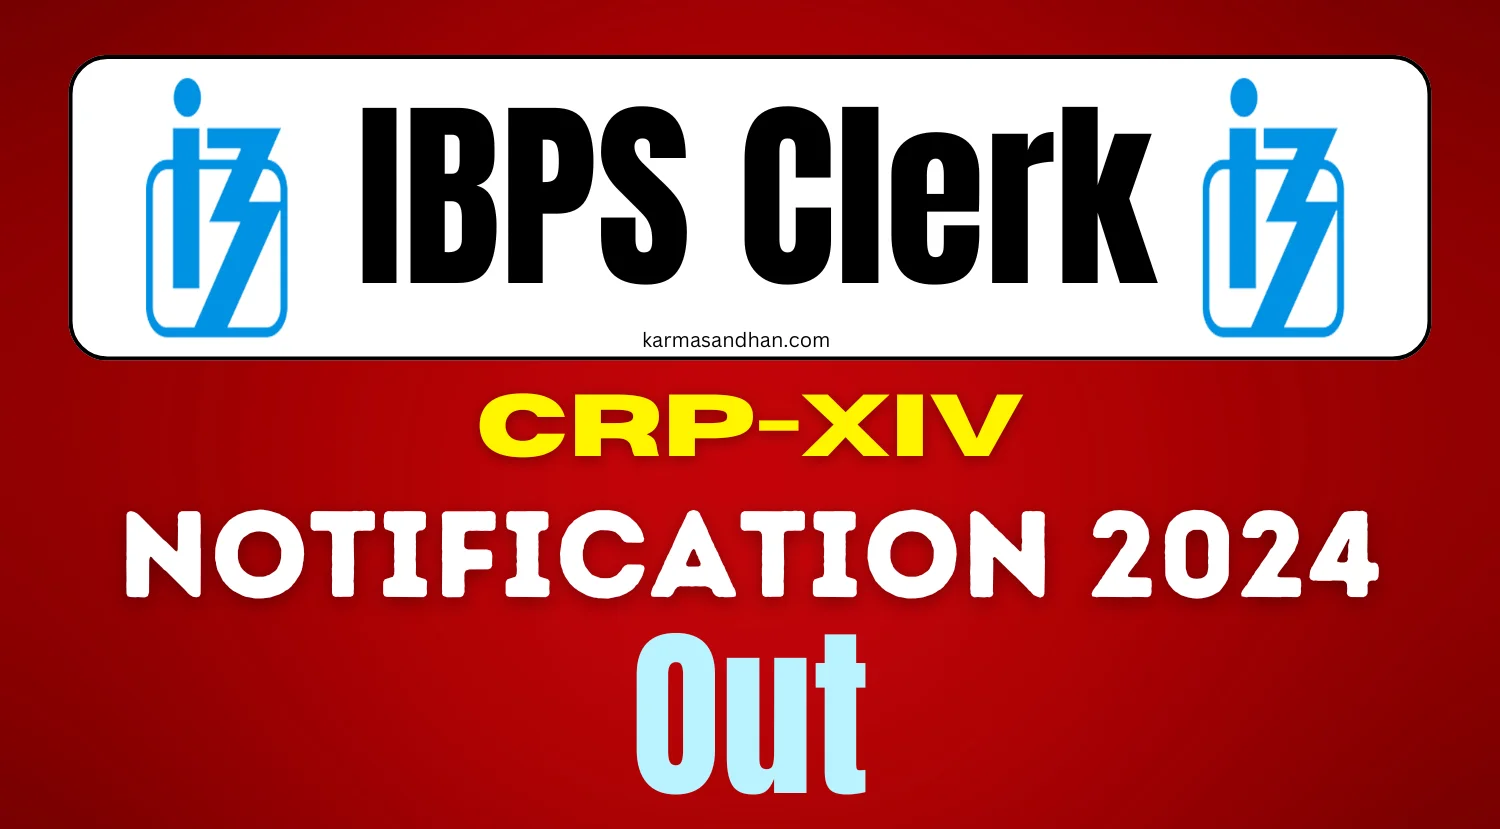 IBPS Clerk Recruitment 2024 Notification Out for CRP-XIV, Apply Online Start From 1 July